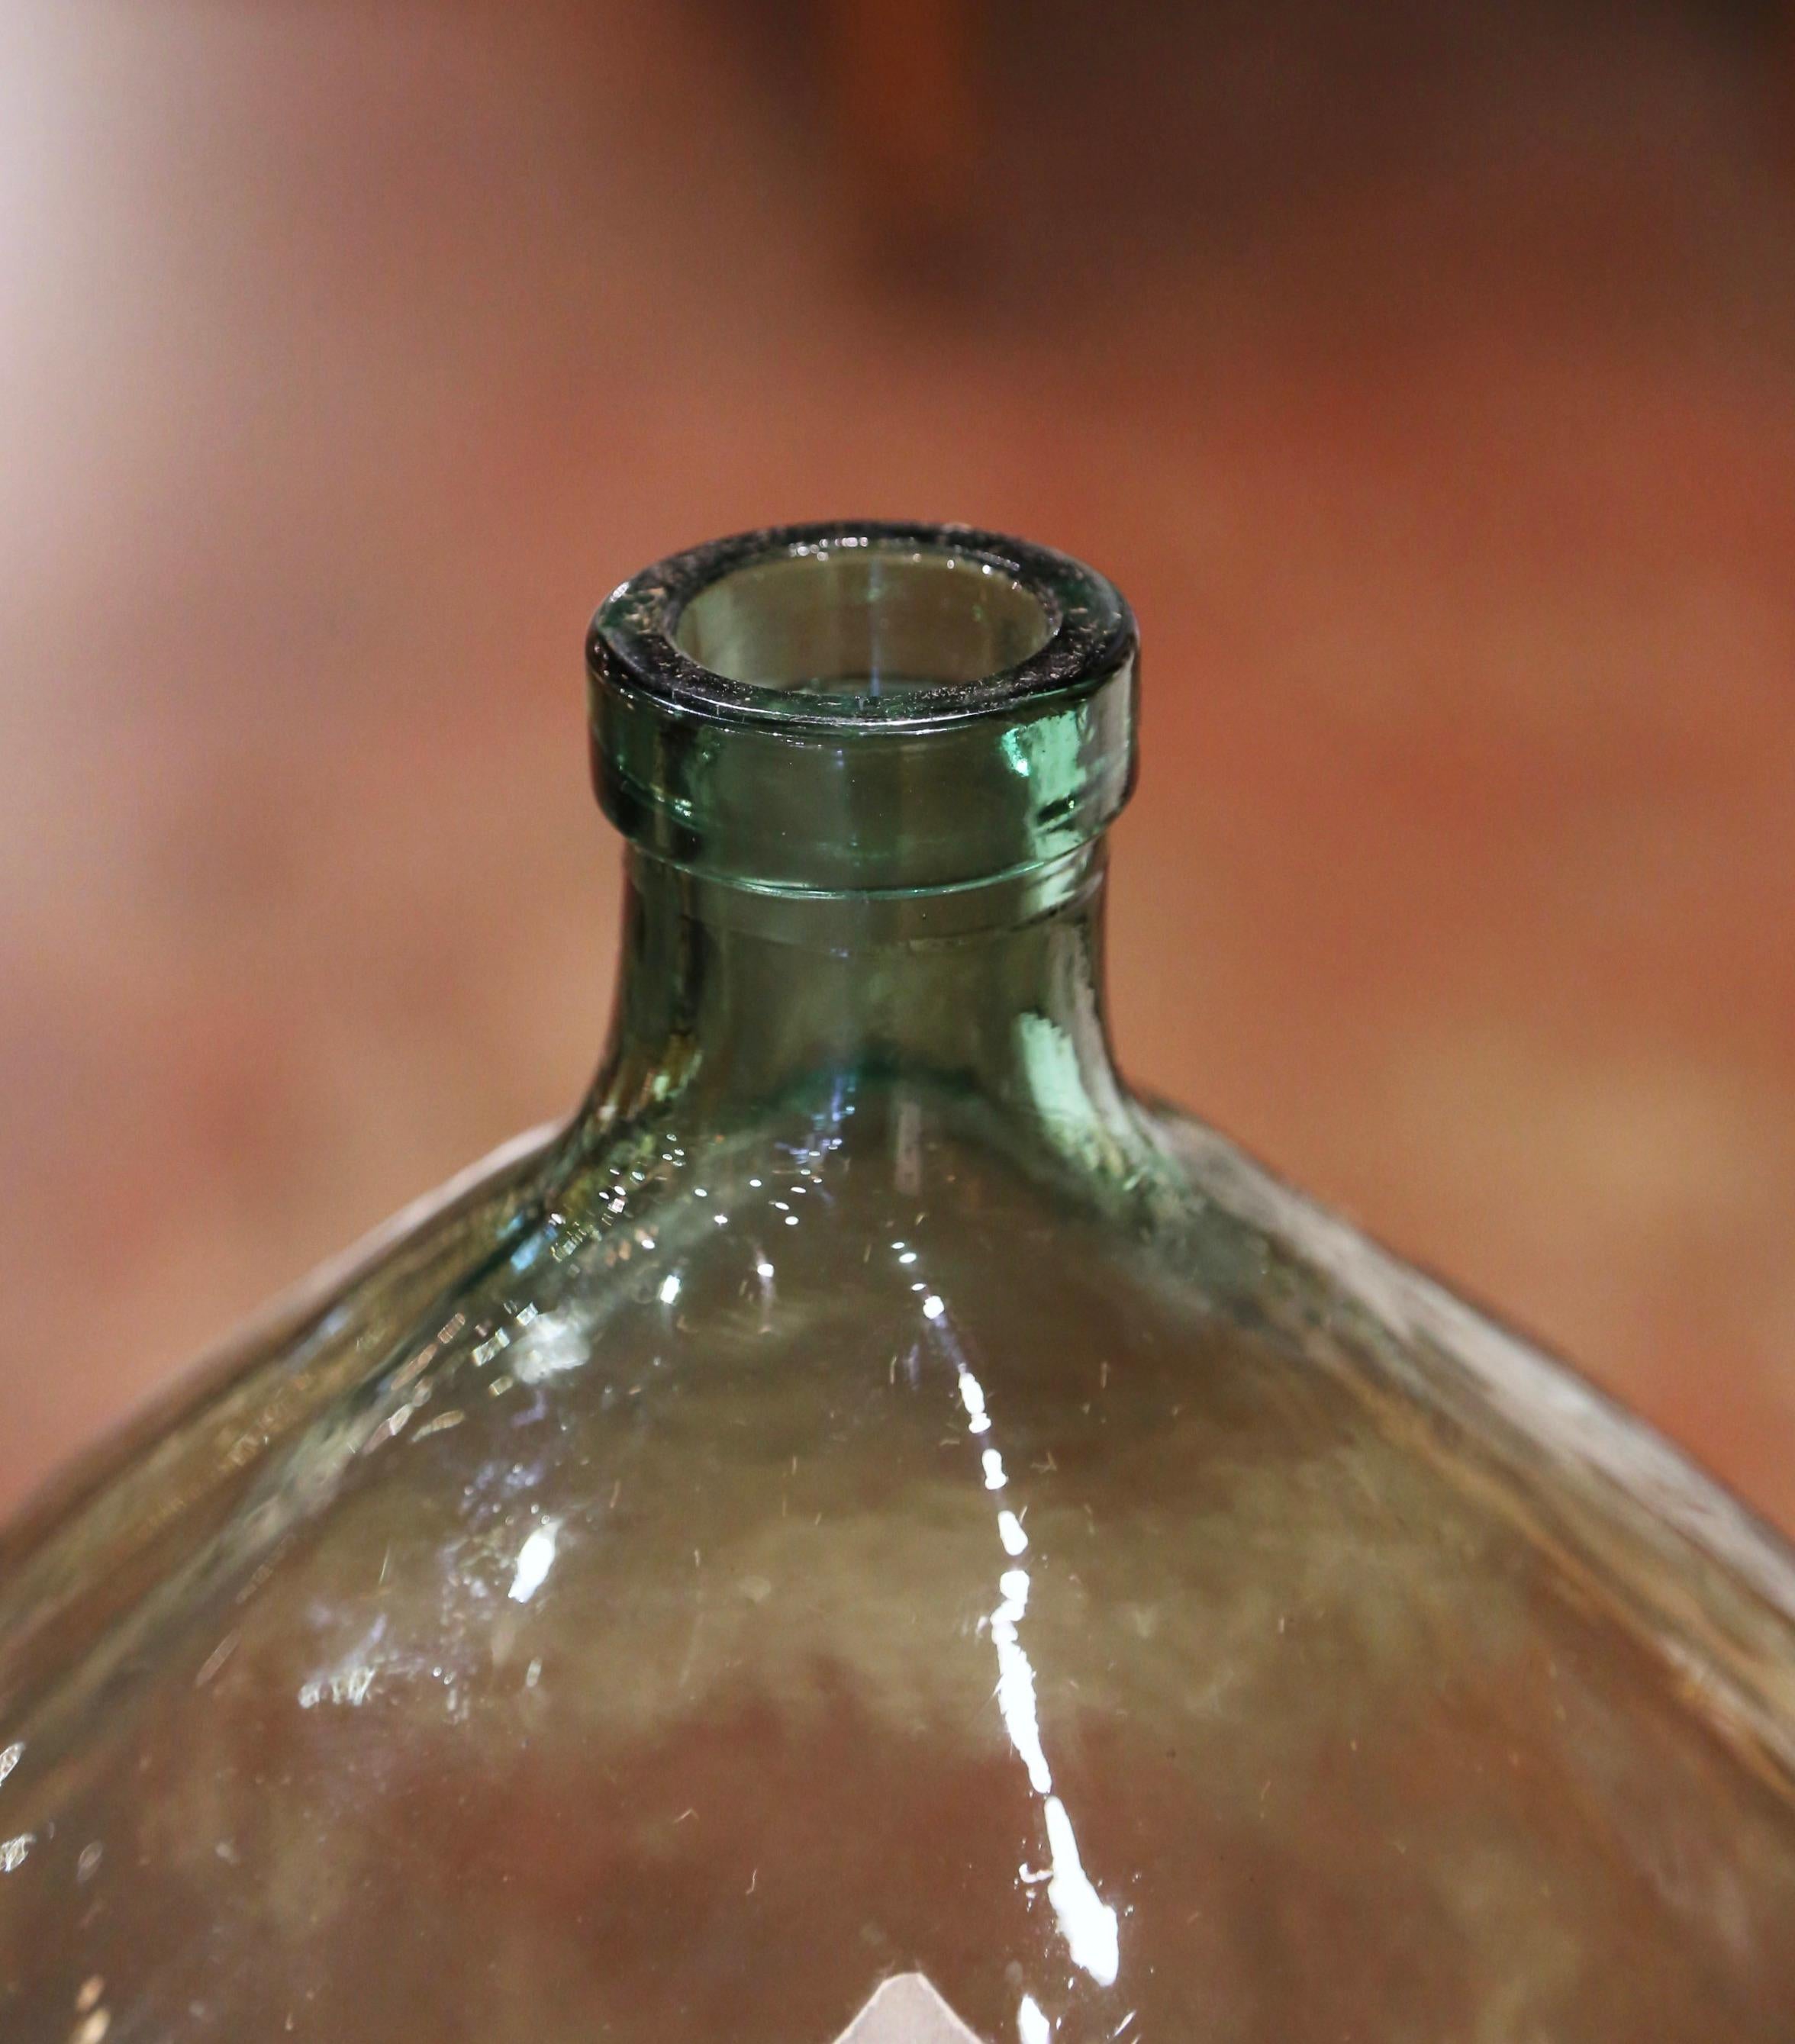 Blown Glass Vintage French Hand Blown Demijohn Glass Bottle with Cork Top